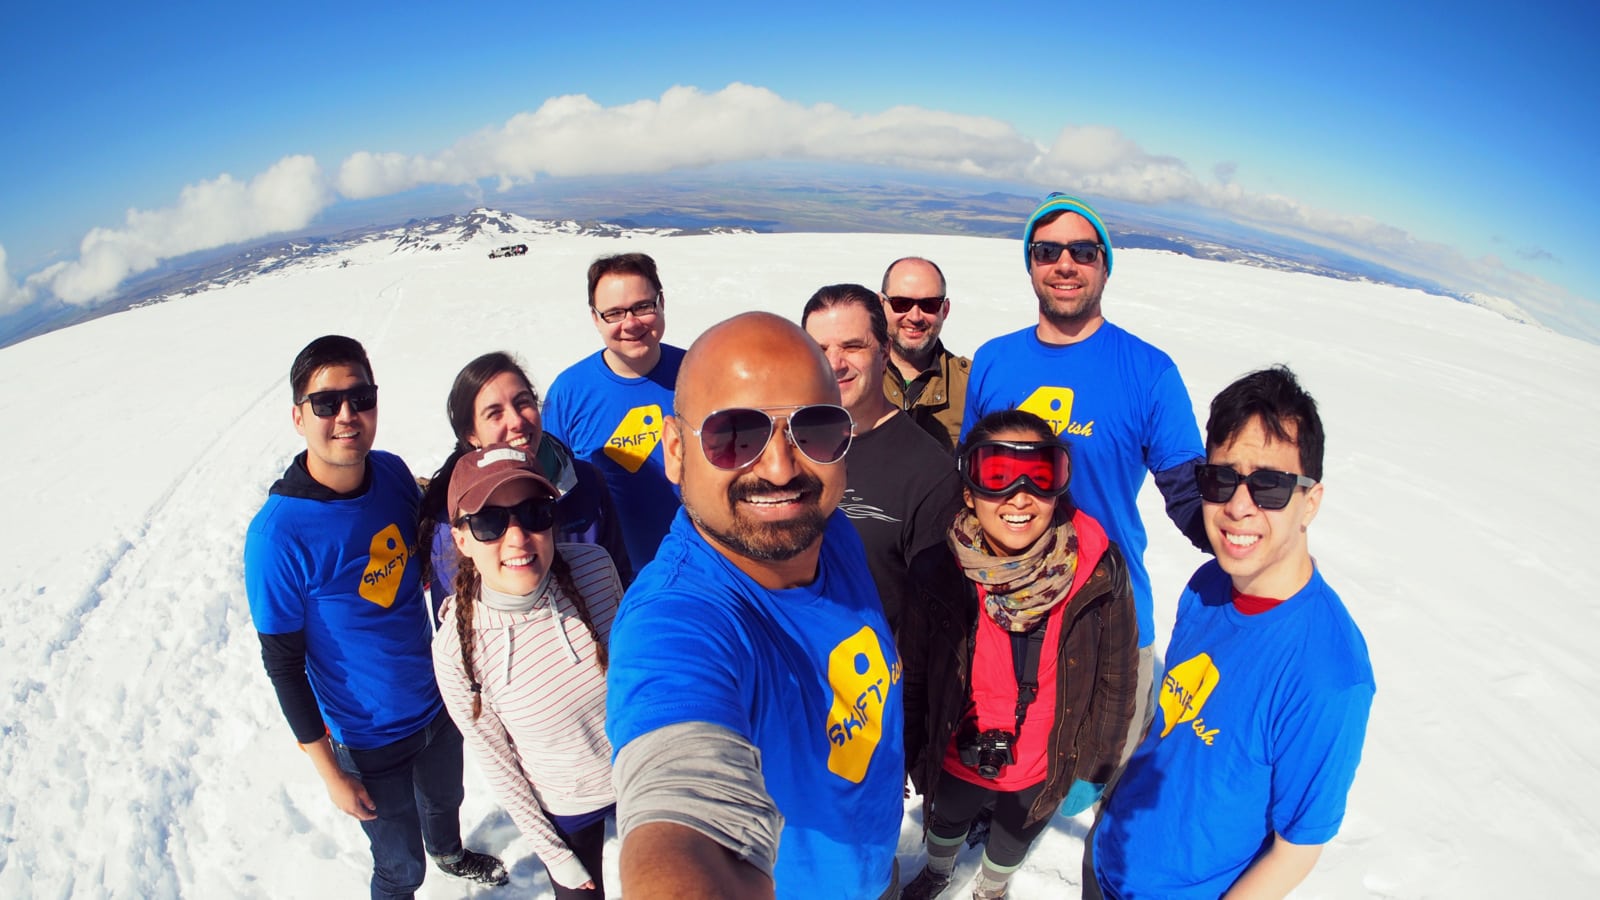 The Skift team, on top of the Eyjafjallajökull volcano in Iceland.